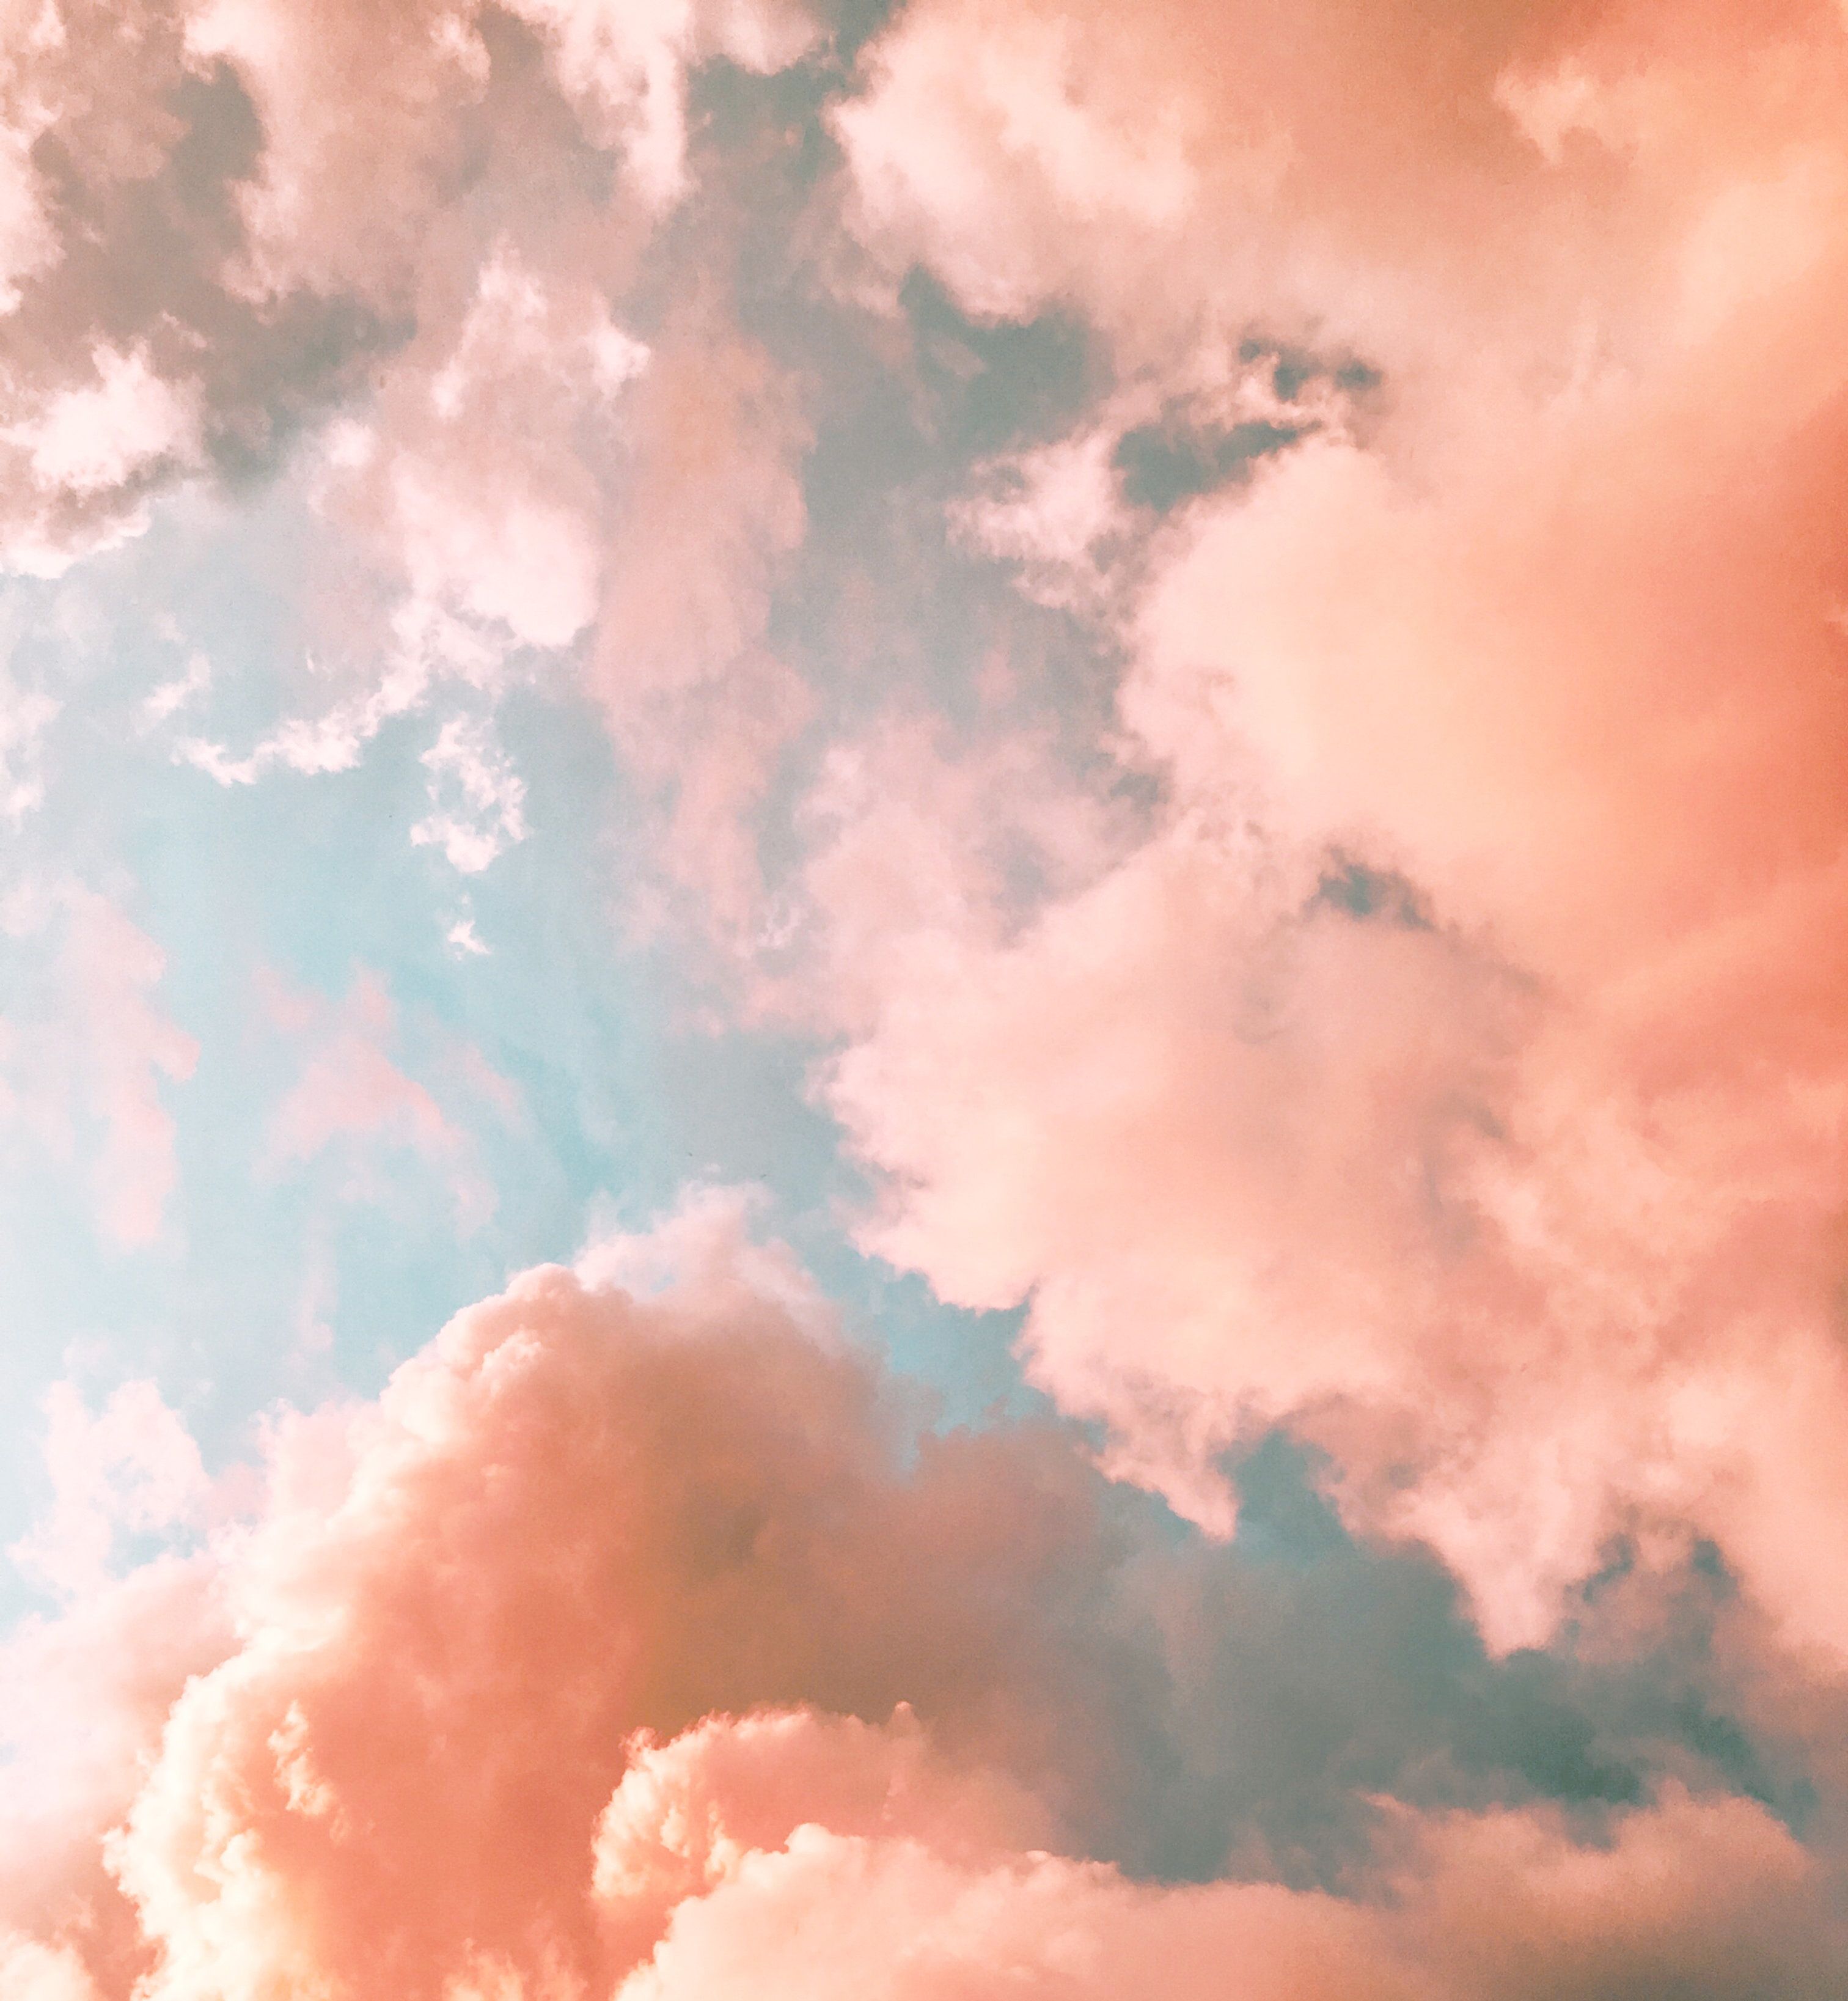 A sky with clouds that look like cotton candy - Vintage clouds